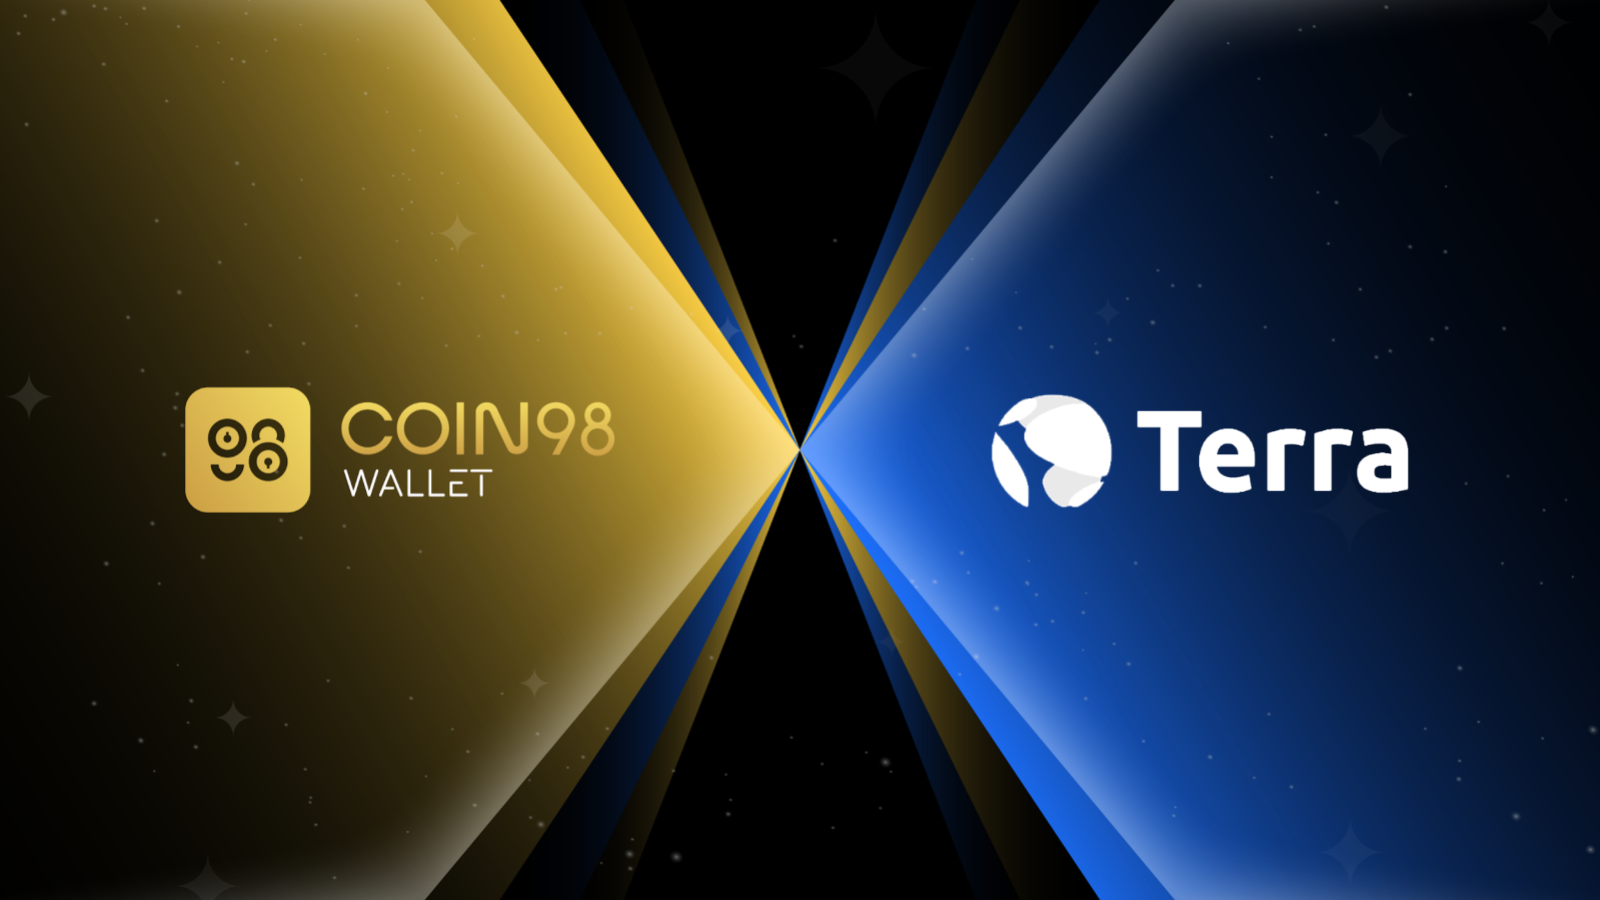 Coin98 Wallet integrates with Terra to build a full-service decentralized parallel economy together